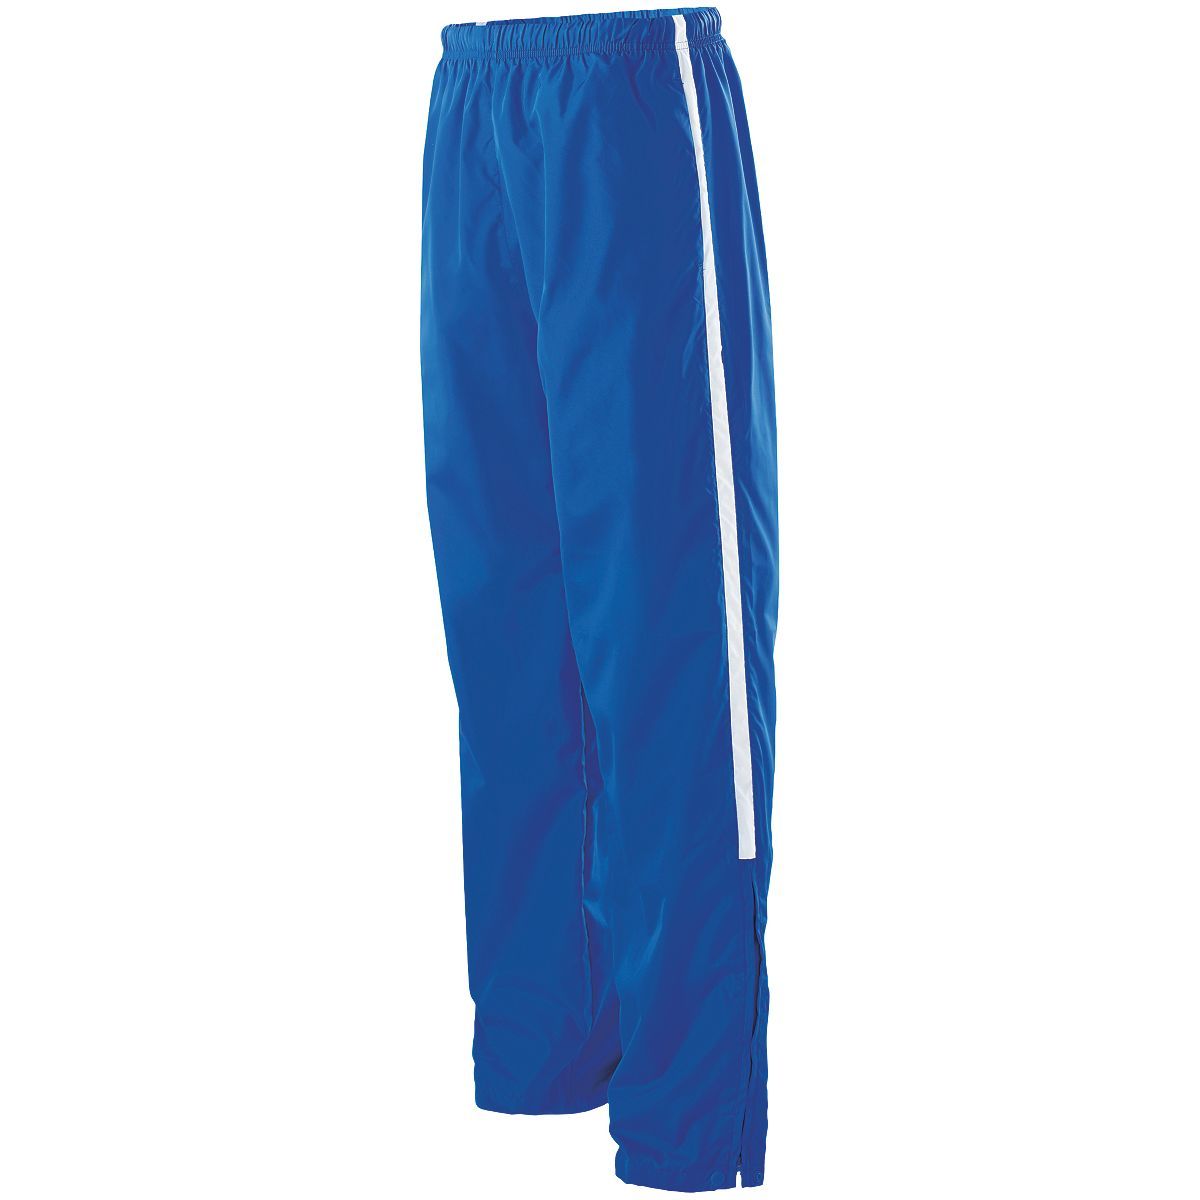 Holloway Sable Pant in Royal/White  -Part of the Adult, Adult-Pants, Pants, Holloway product lines at KanaleyCreations.com